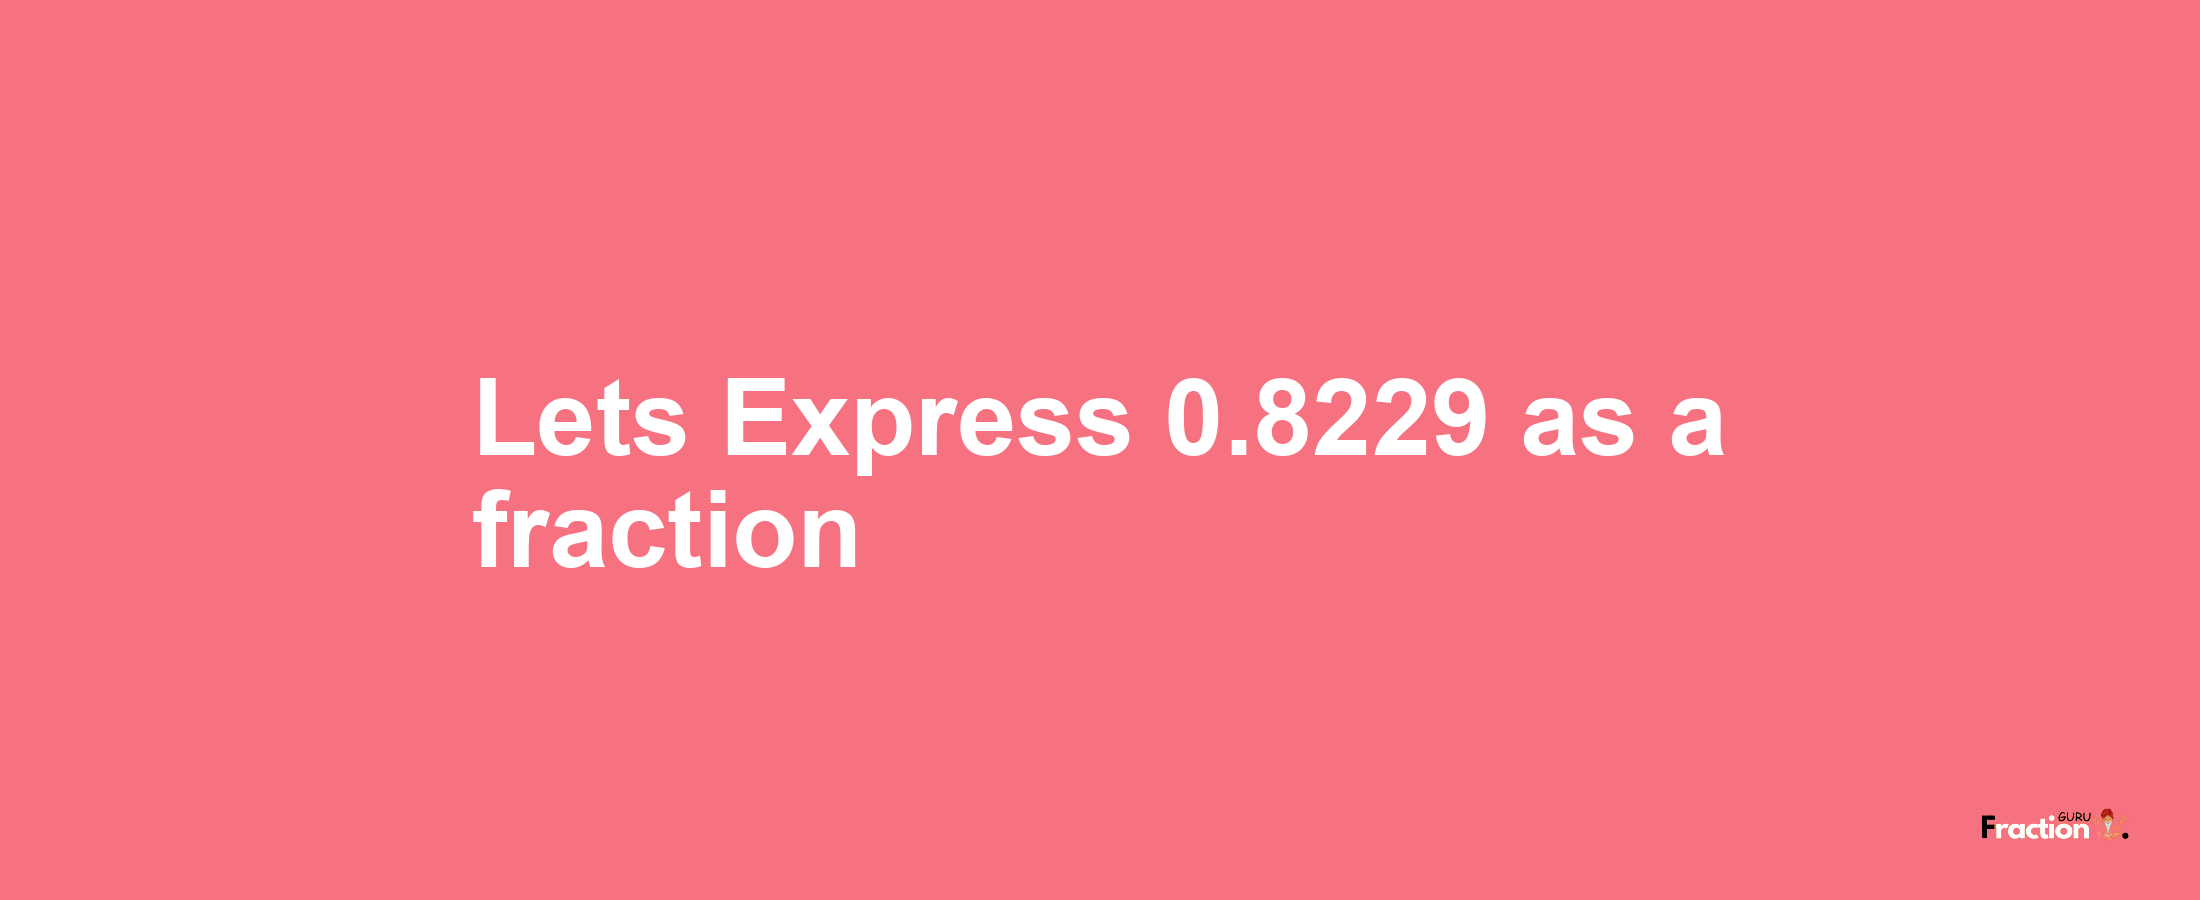 Lets Express 0.8229 as afraction